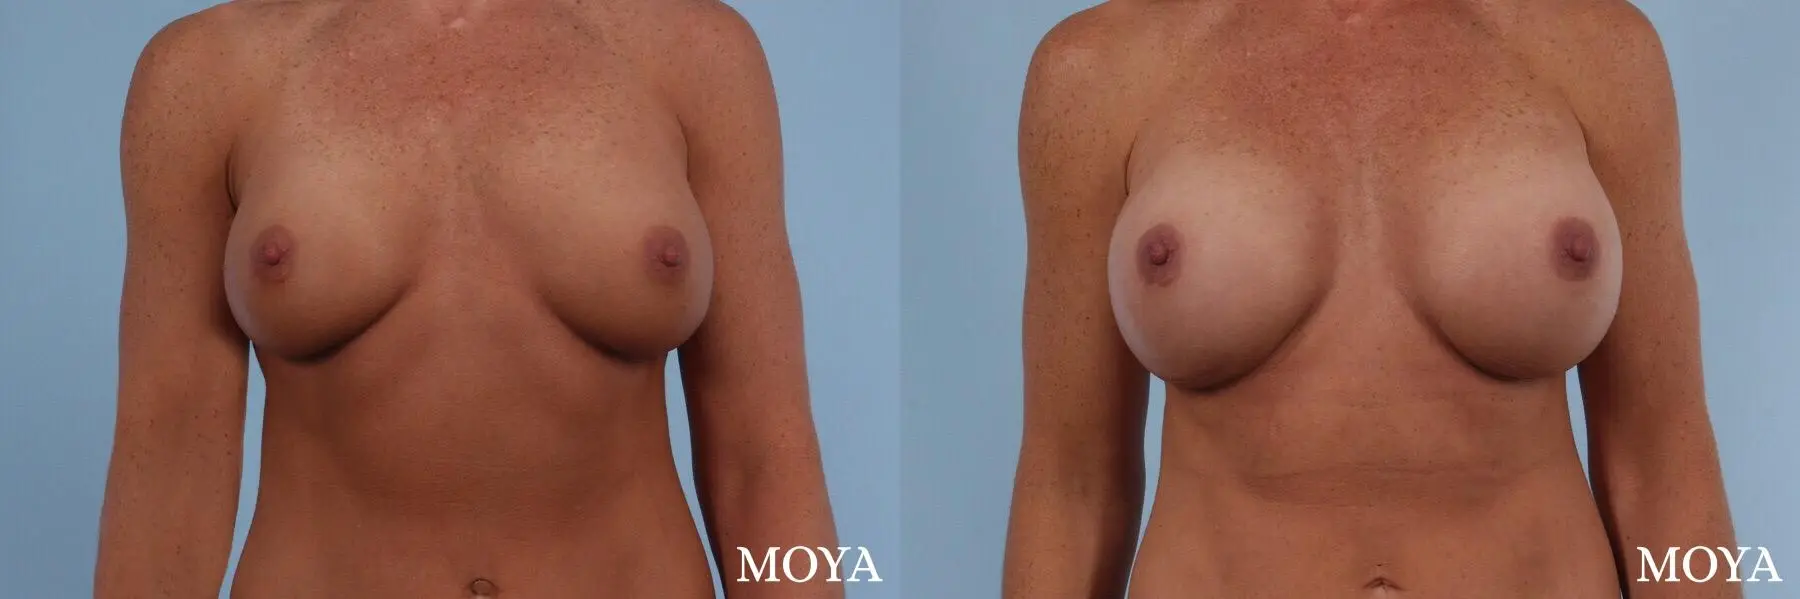 Breast Implant Exchange: Patient 3 - Before and After  